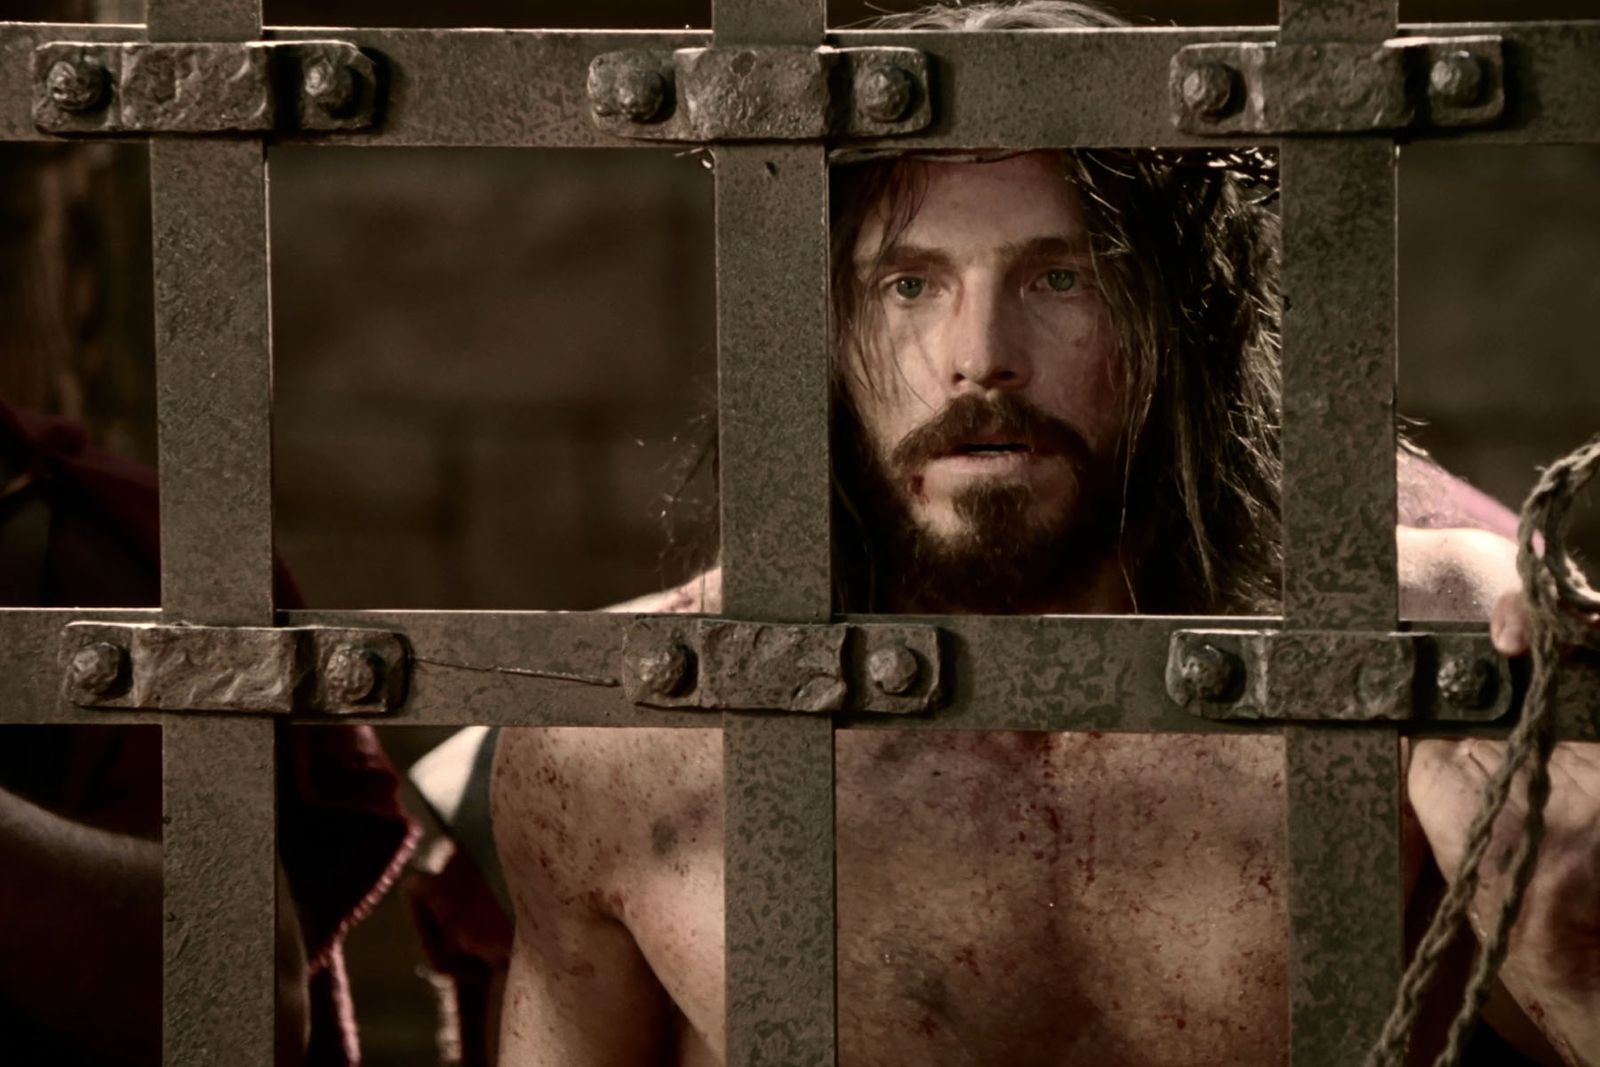 Jesus is scourged by soldiers while in prison.